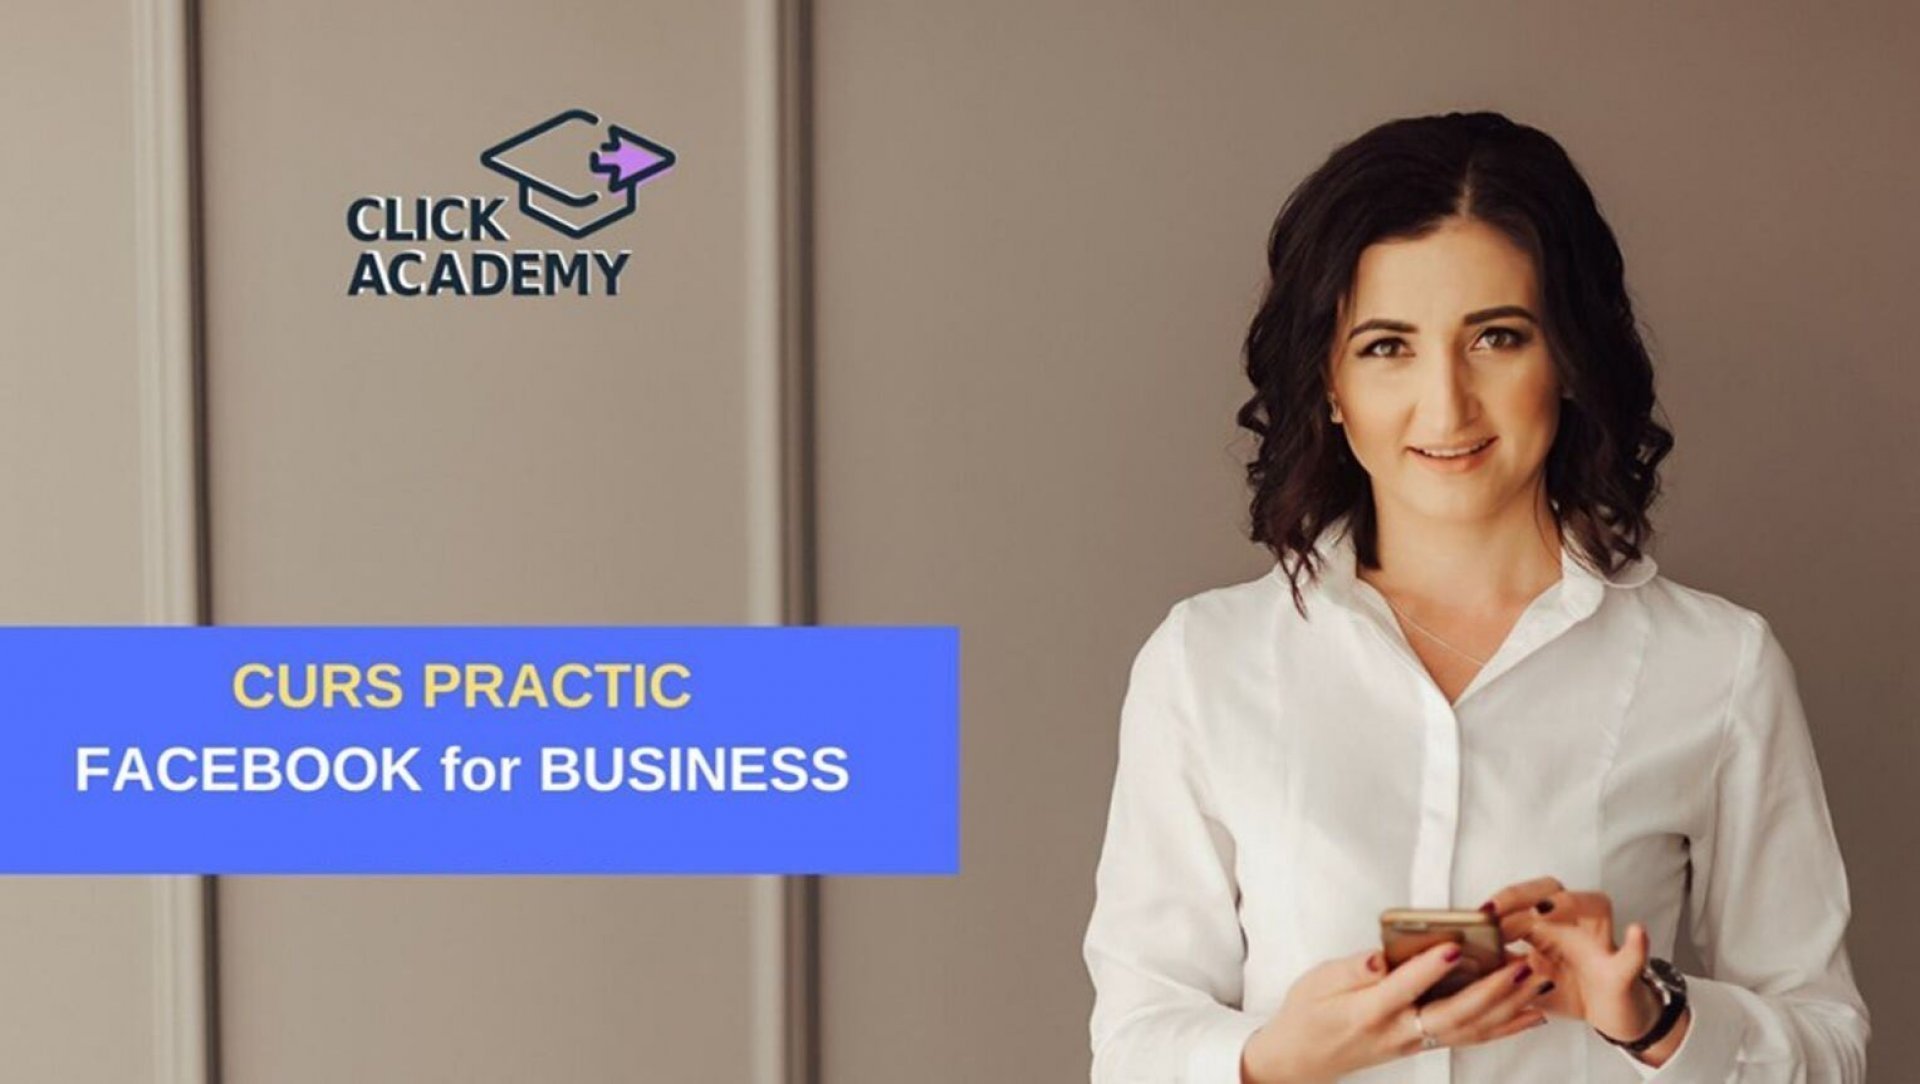 Curs practic - Facebook for Business 2.1